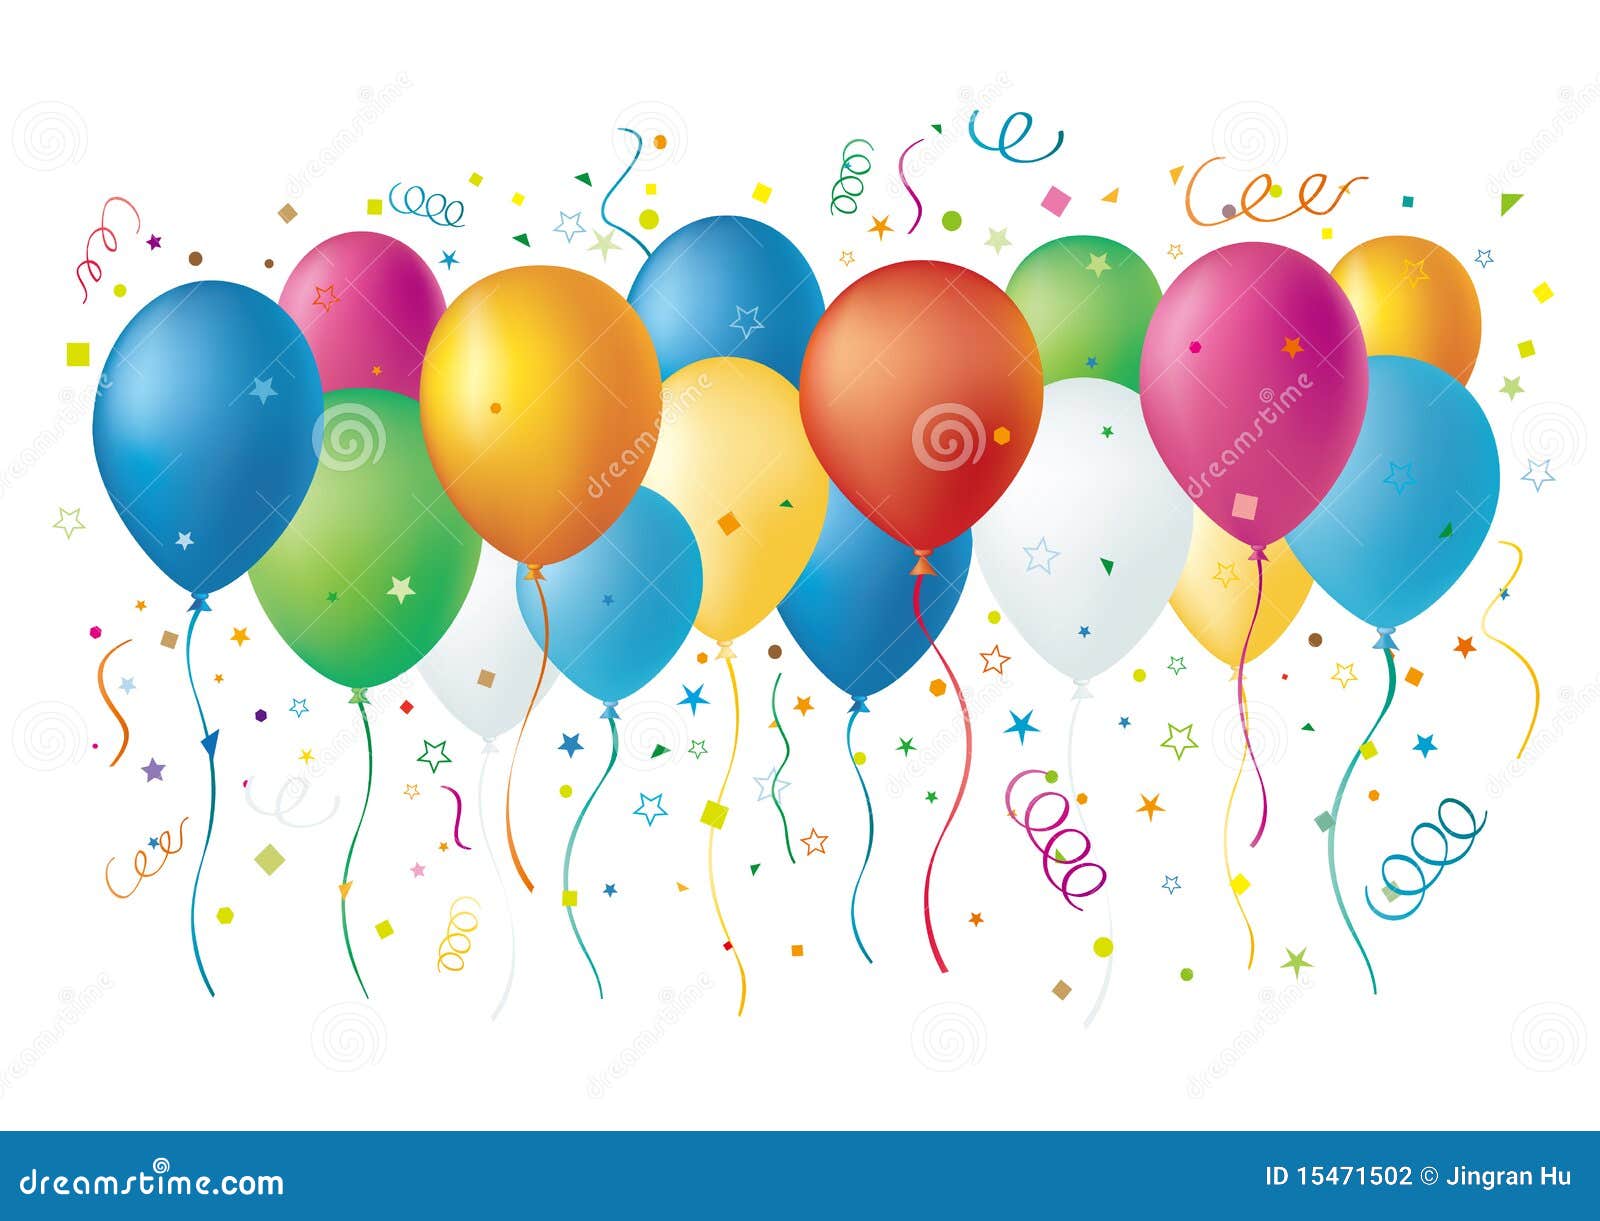 clipart balloons and confetti - photo #21